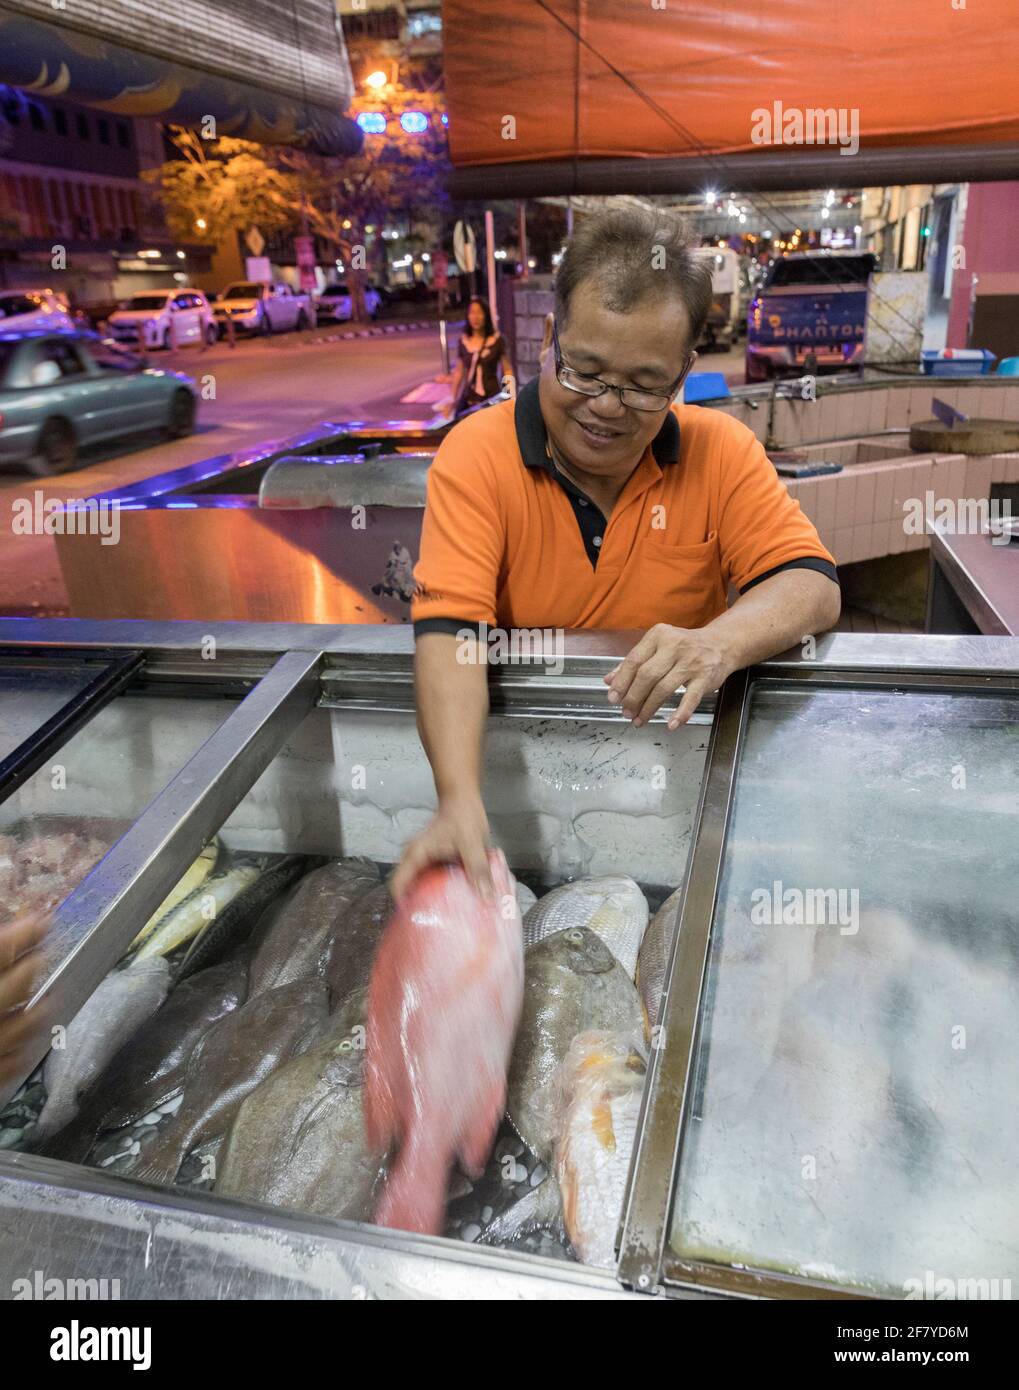 Selecting fish to be cooked in restaurant, Miri, Malaysia Stock Photo